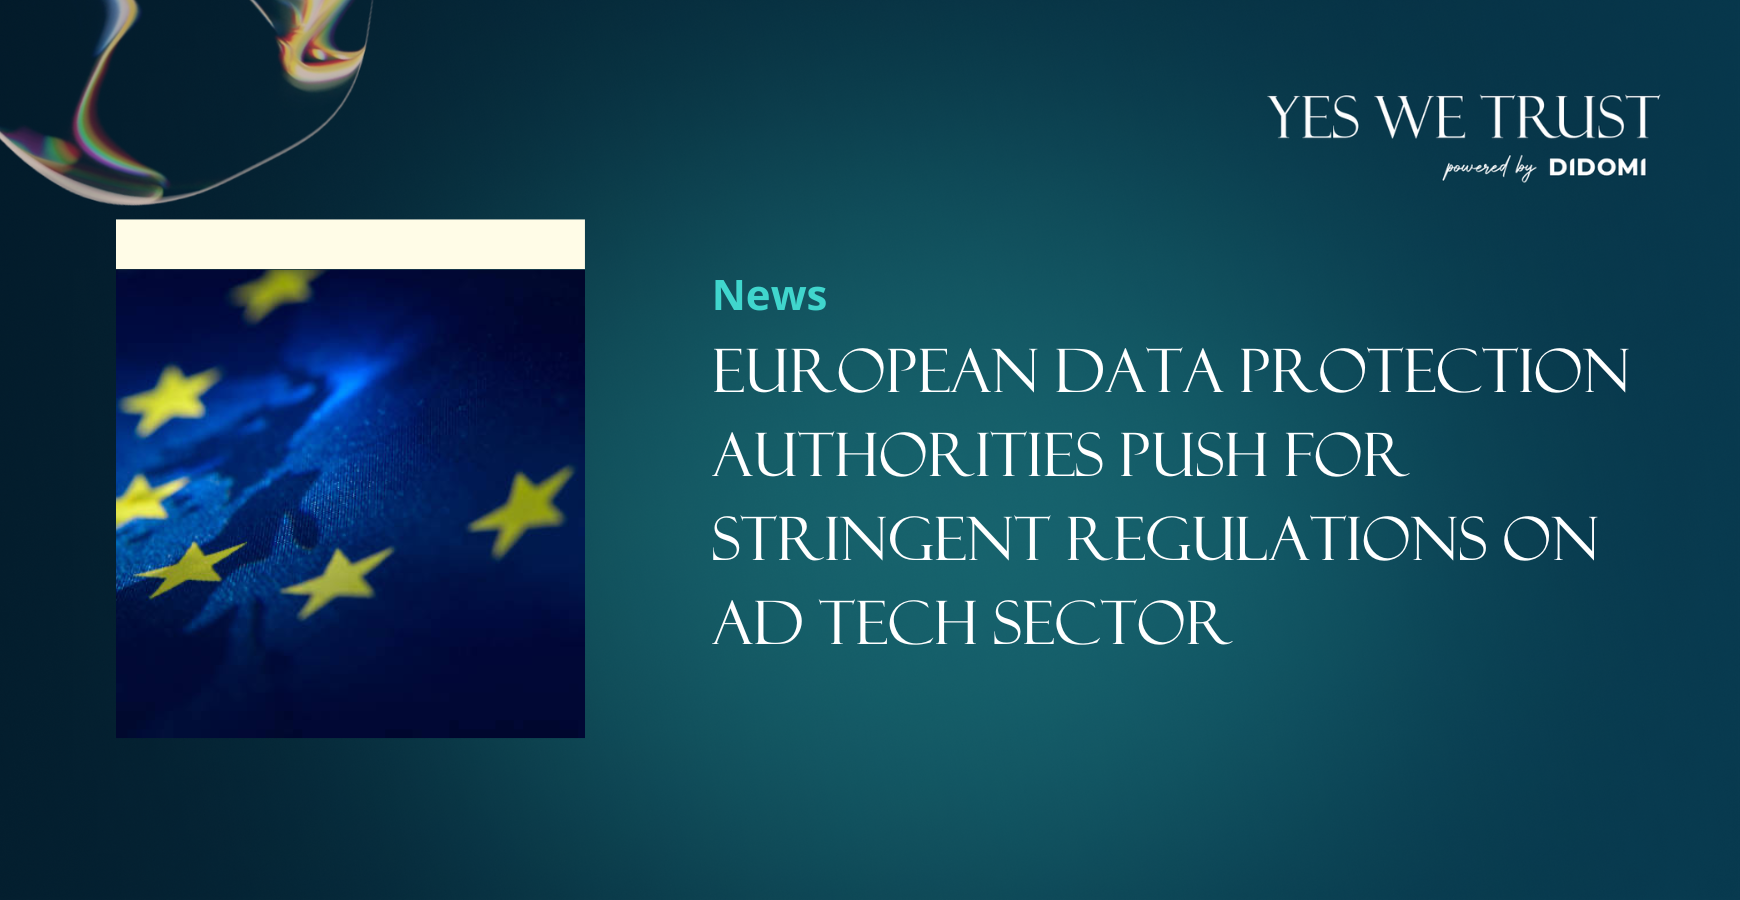 European Data Protection Authorities push for stringent regulations on ad tech sector